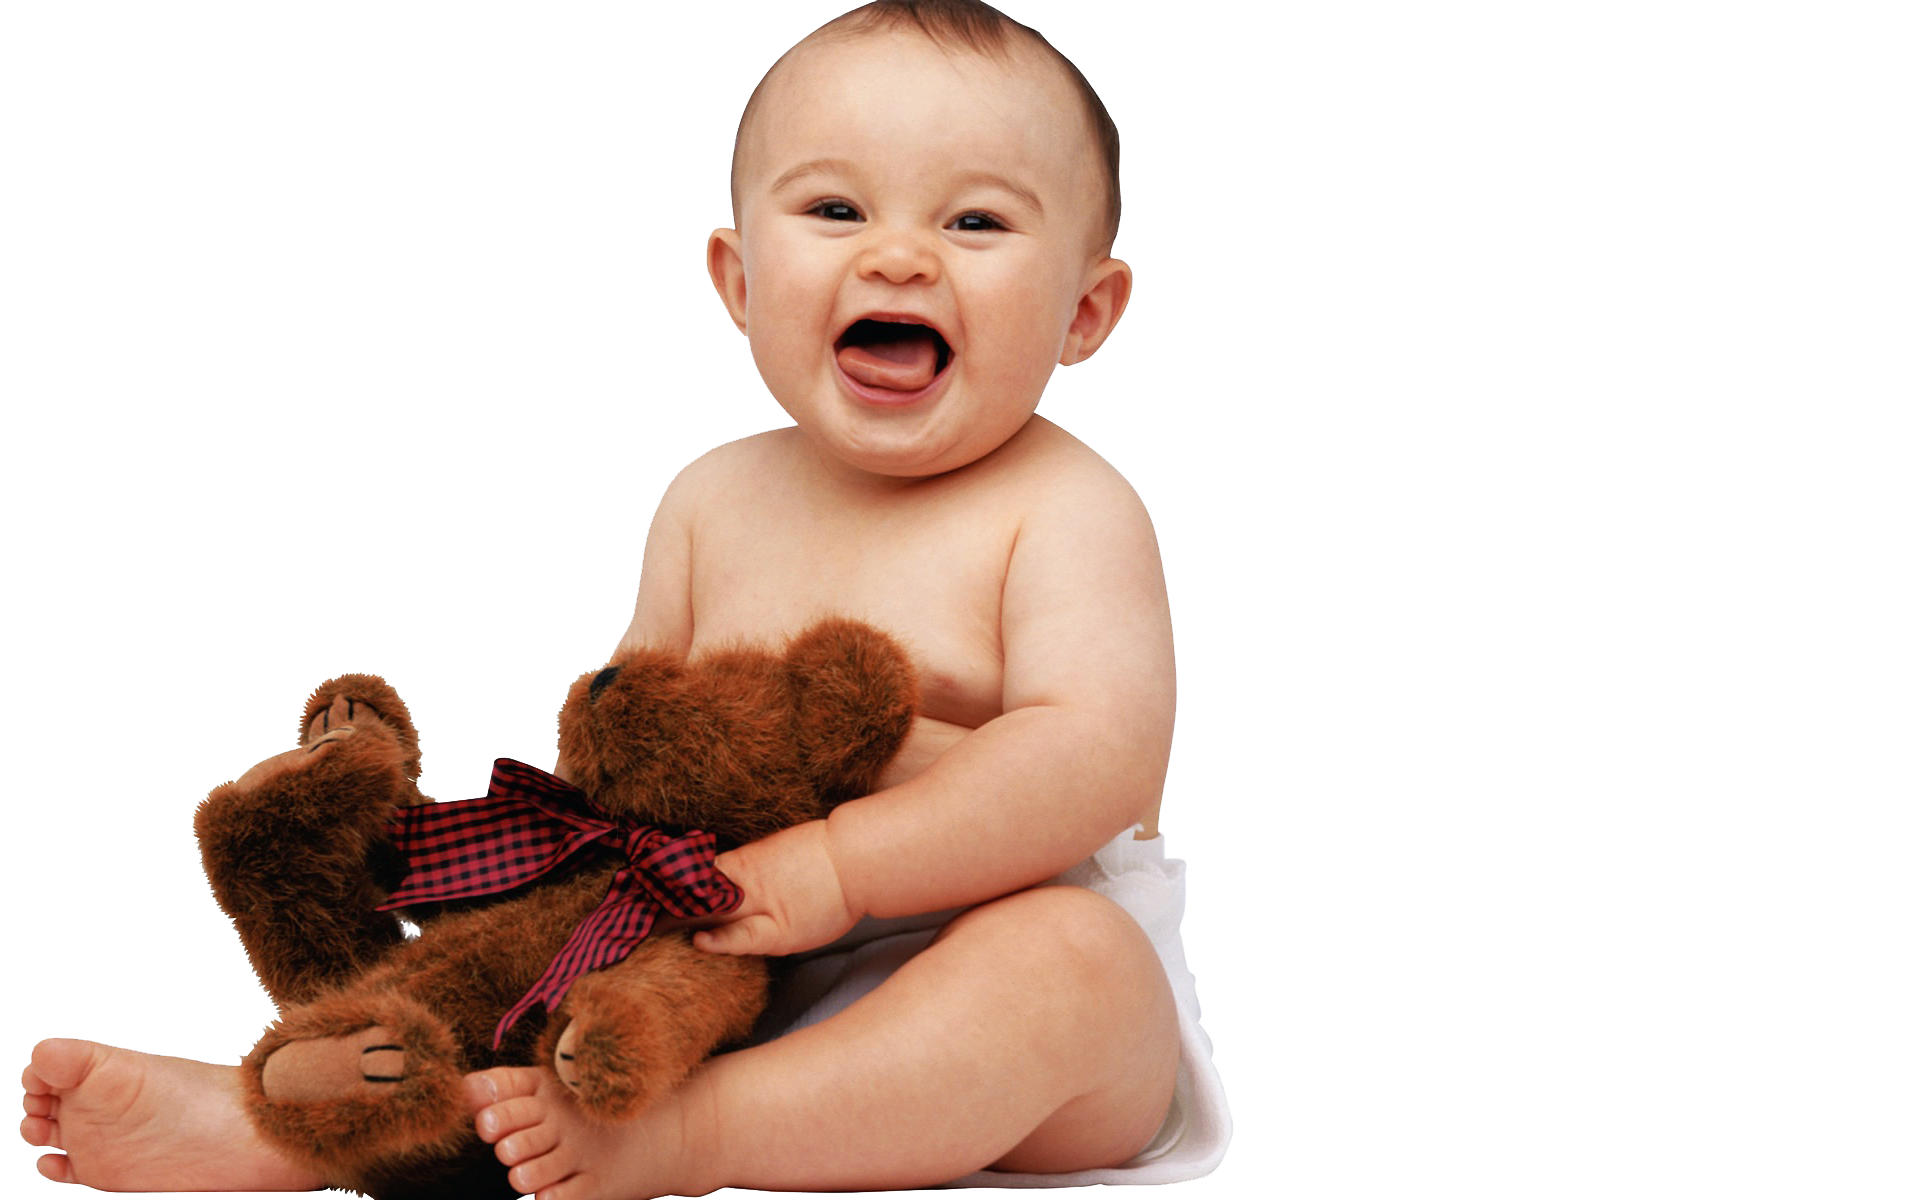 219300 Baby Stuff Stock Photos Pictures  RoyaltyFree Images  iStock   Baby Baby clothes Baby products